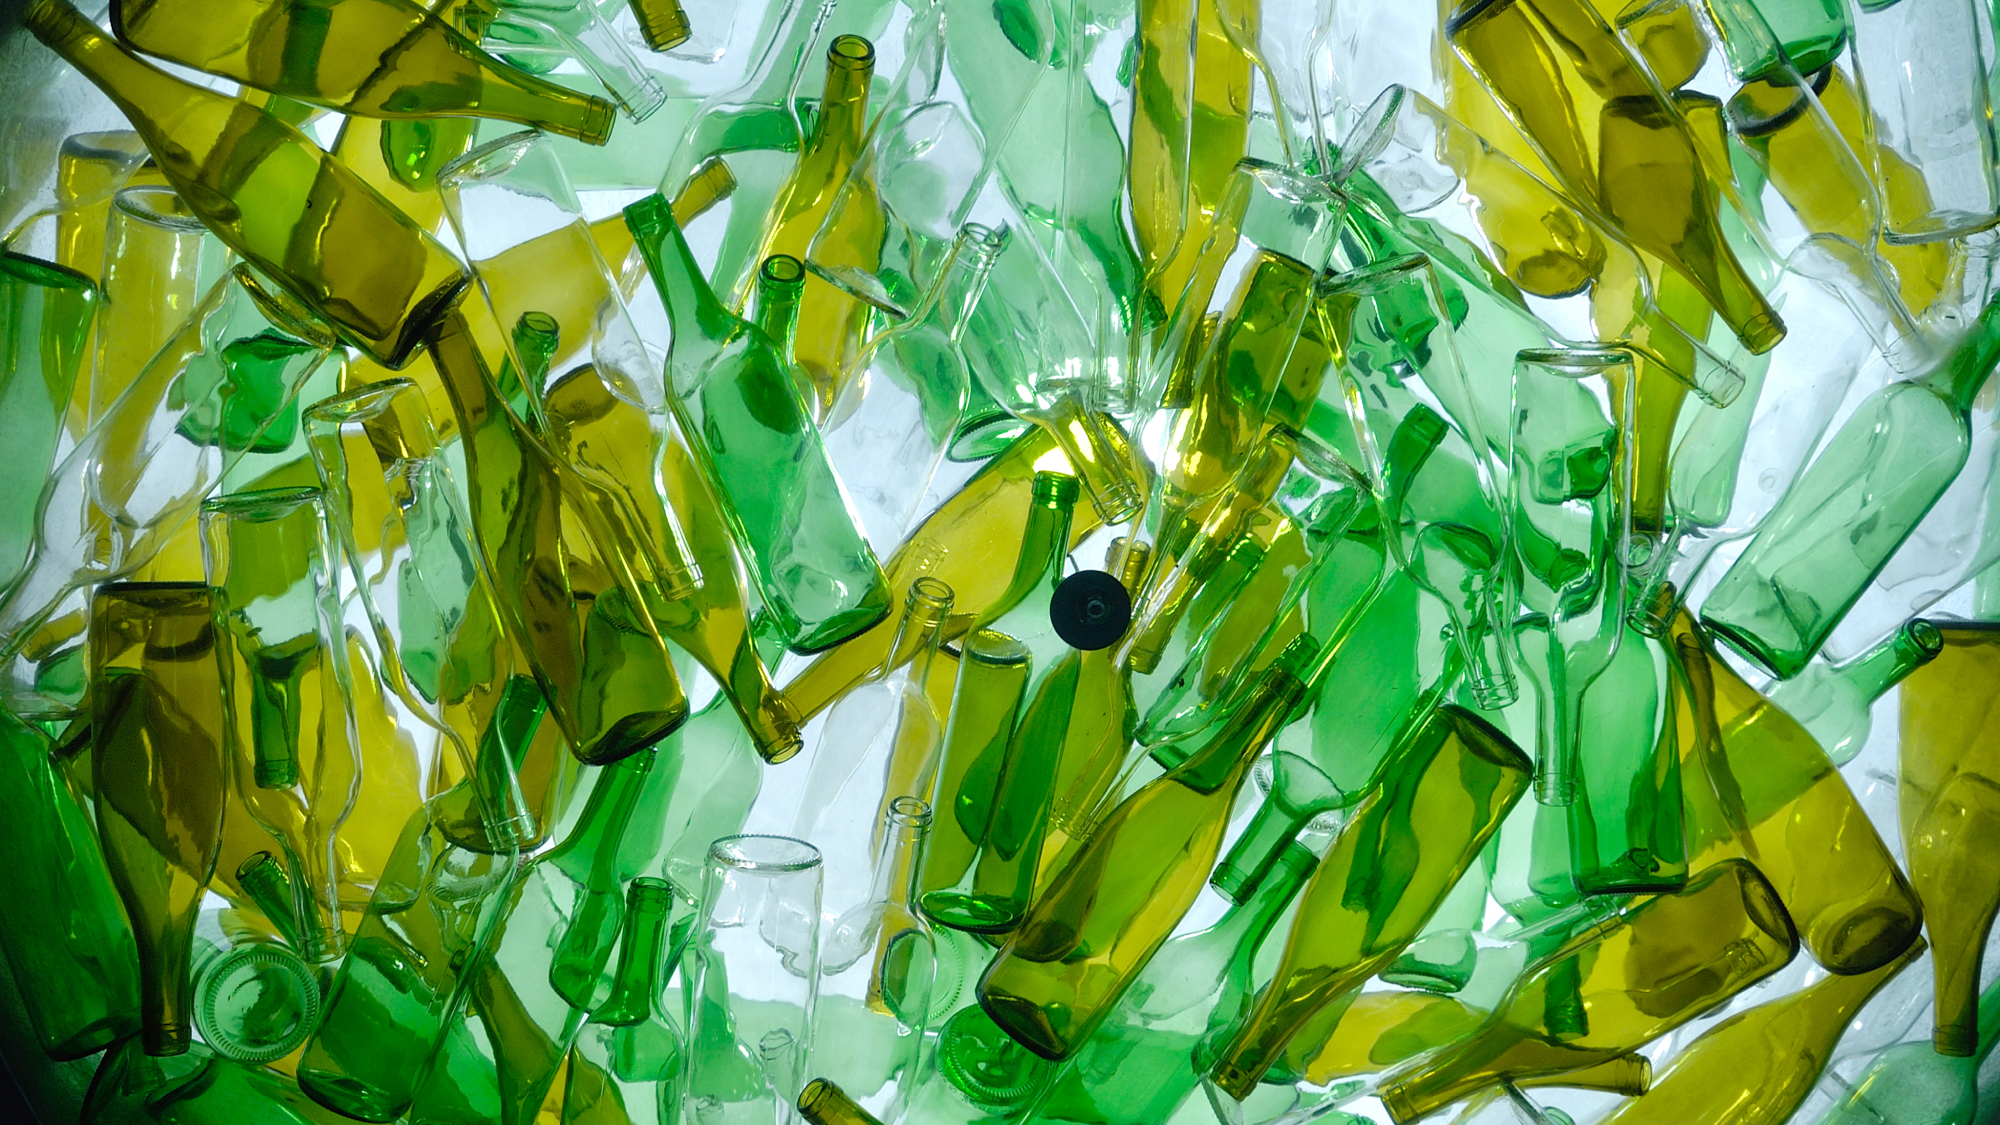 Green recycled glass bottles